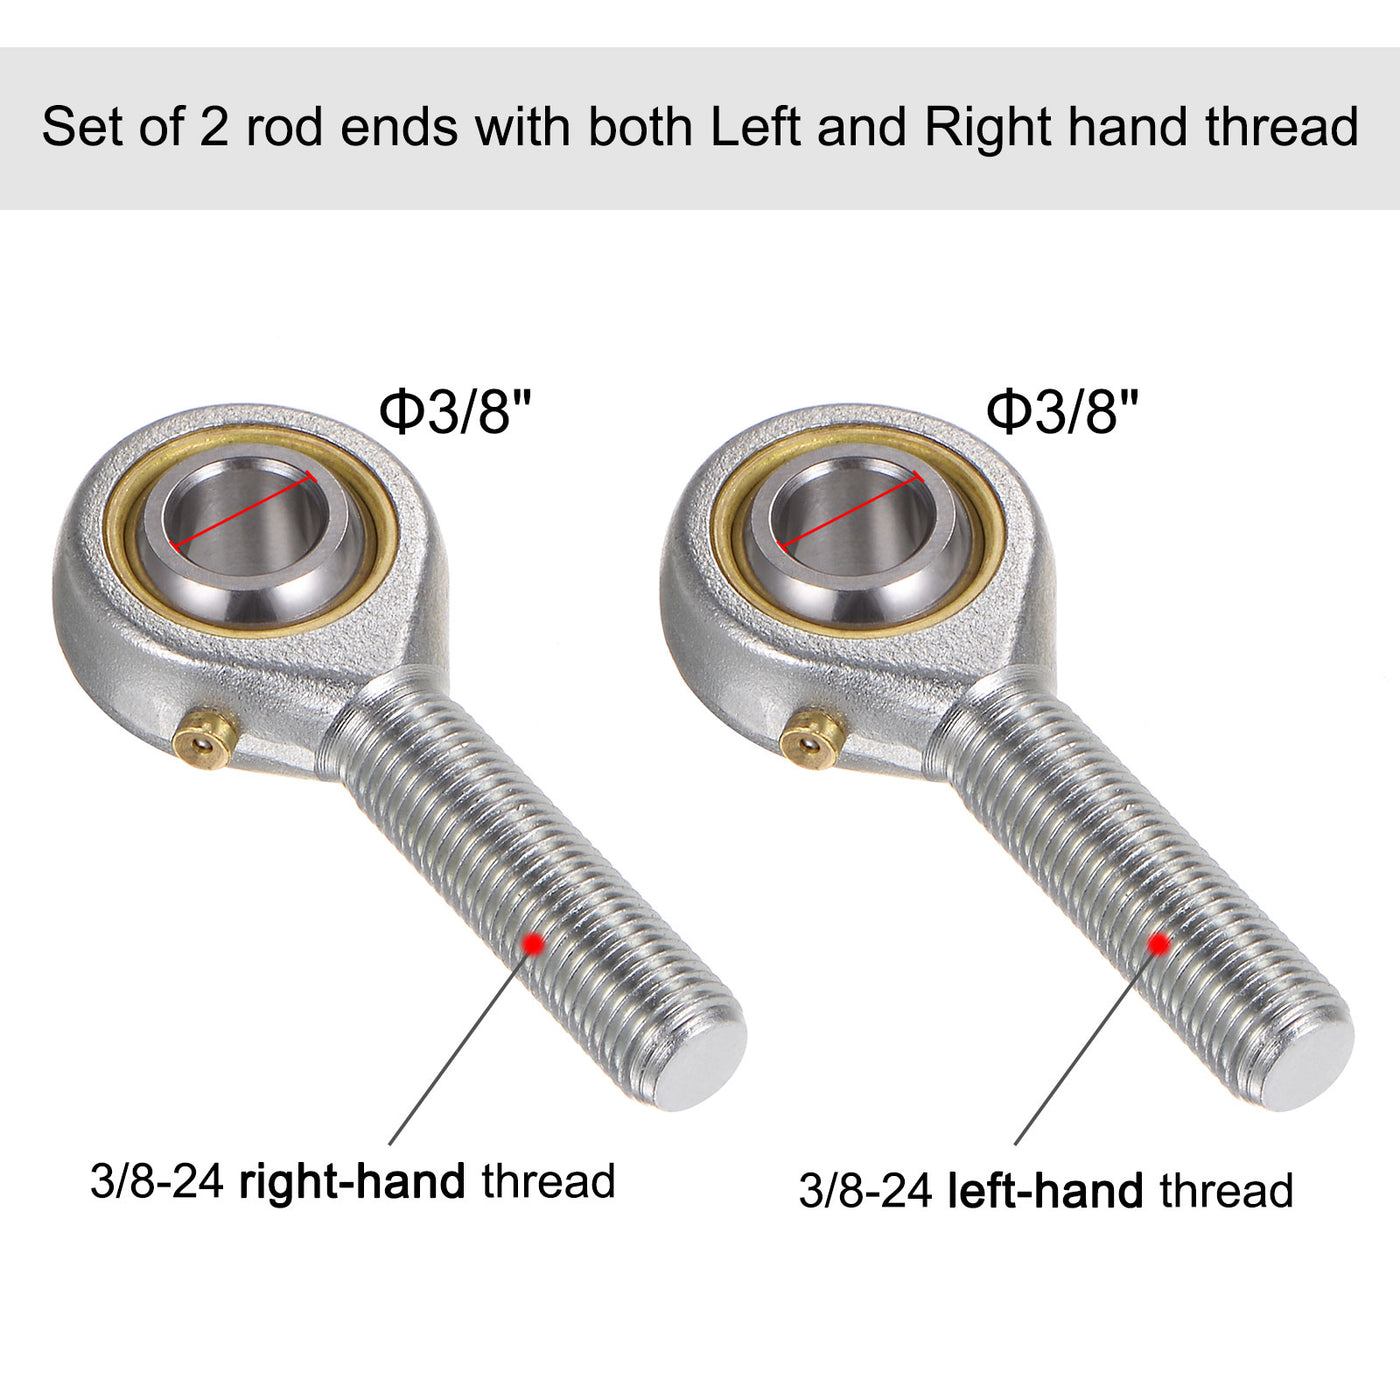 uxcell Uxcell POSB6 3/8" Male Rod End Set - 2pcs of 3/8-24 Left and Right Thread with Jam Nut